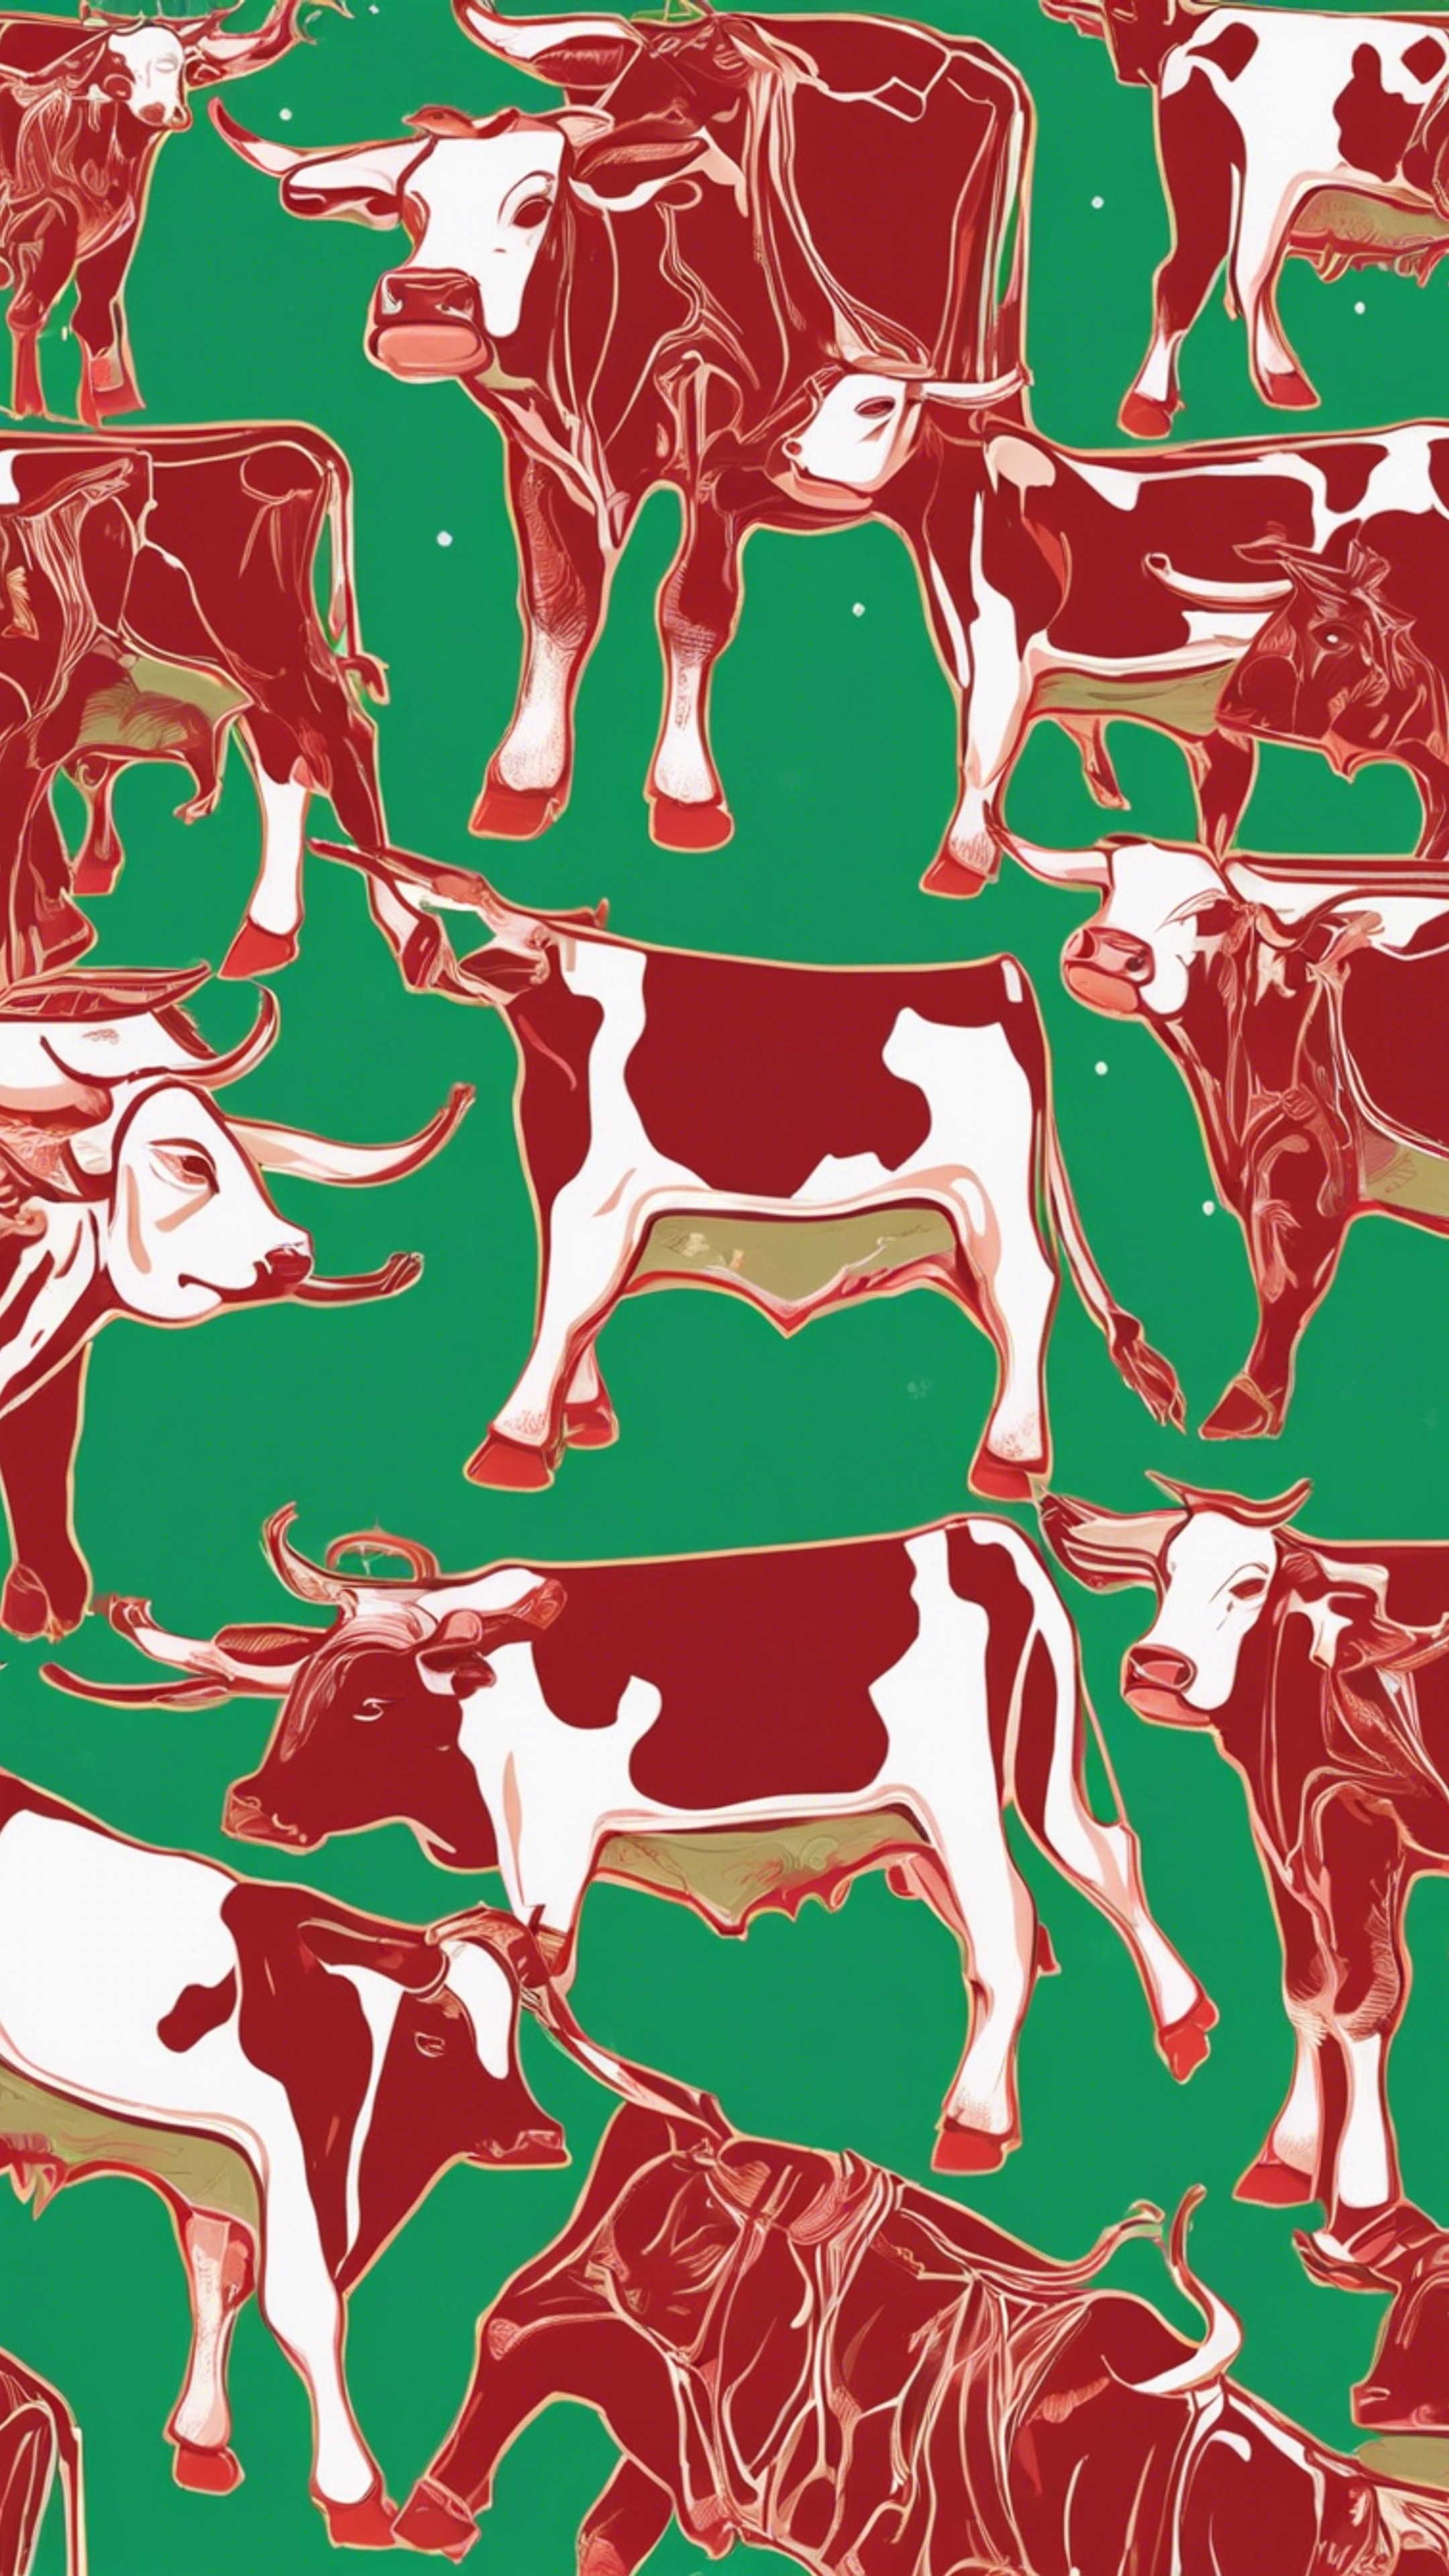 An abstract art featuring earthy green and vibrant red cow patterns. Fondo de pantalla[bce8b500f11040f088c2]